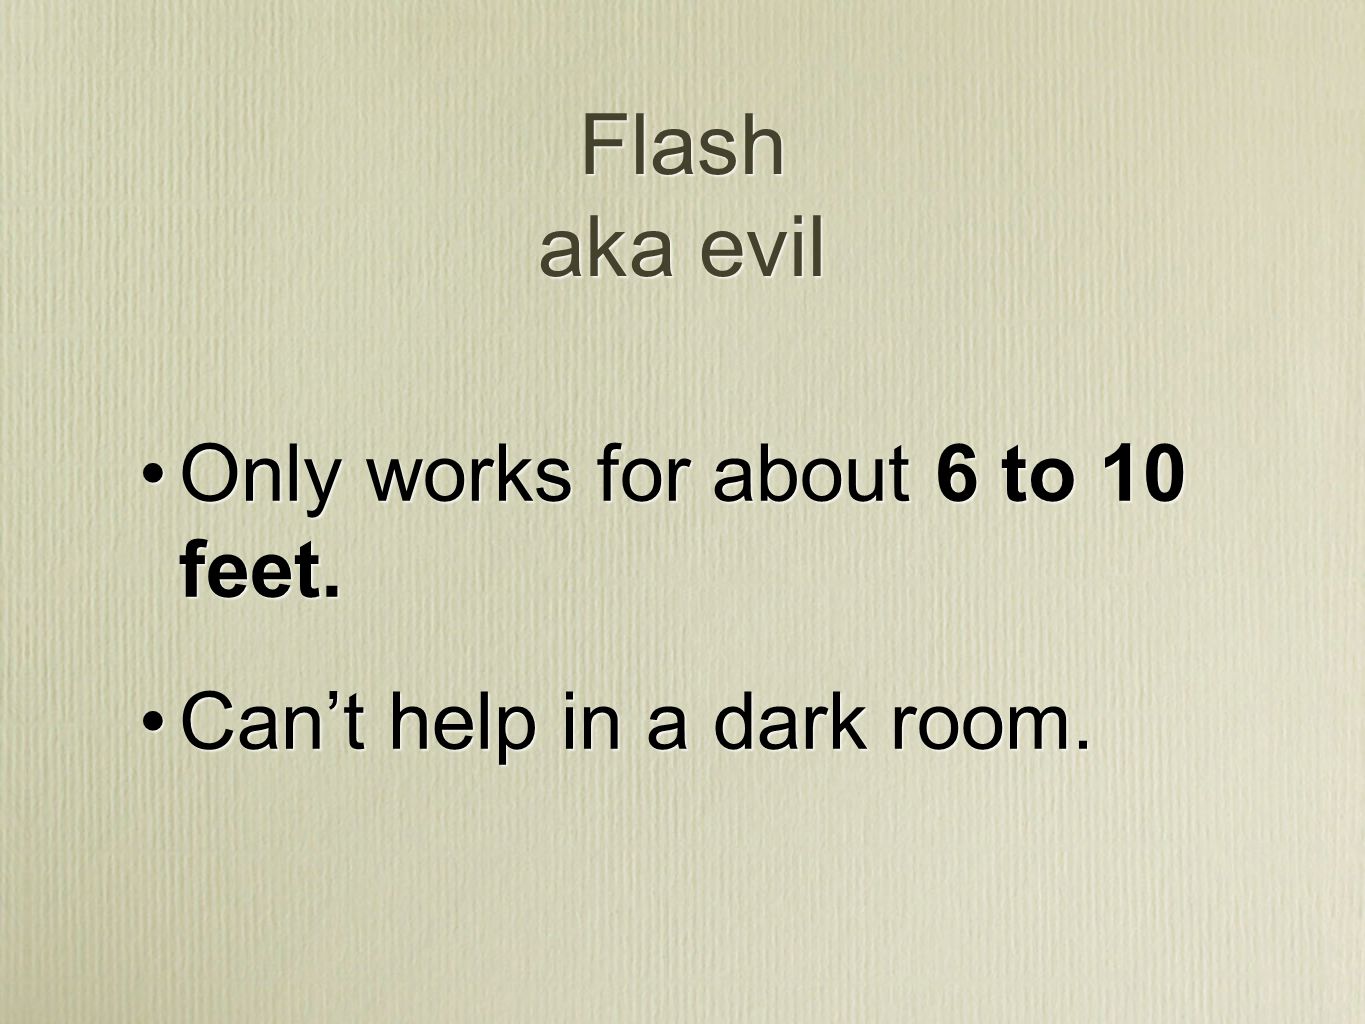 Flash aka evil Only works for about 6 to 10 feet. Can’t help in a dark room.